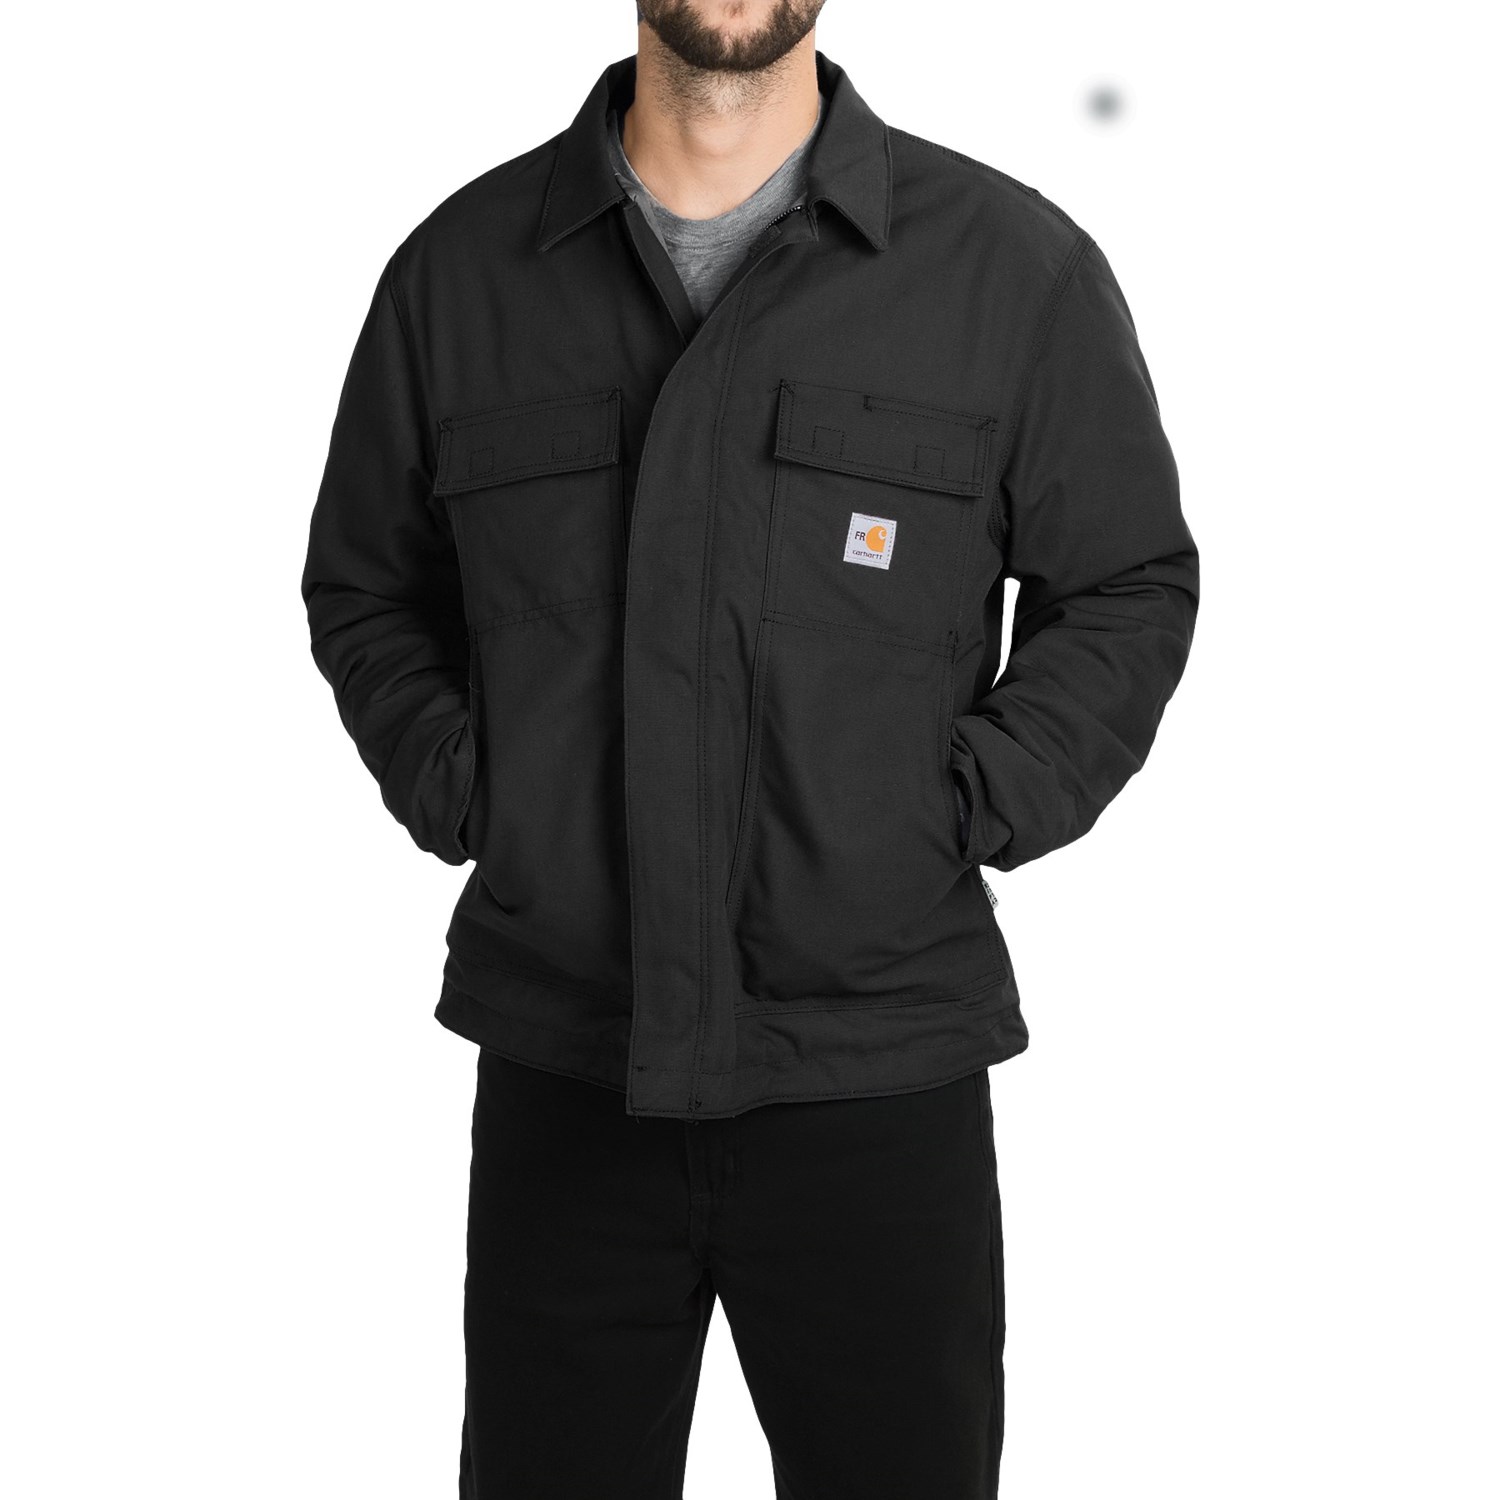 Carhartt Flame-Resistant Lanyard Access Jacket – Quilt Lined (For Men)